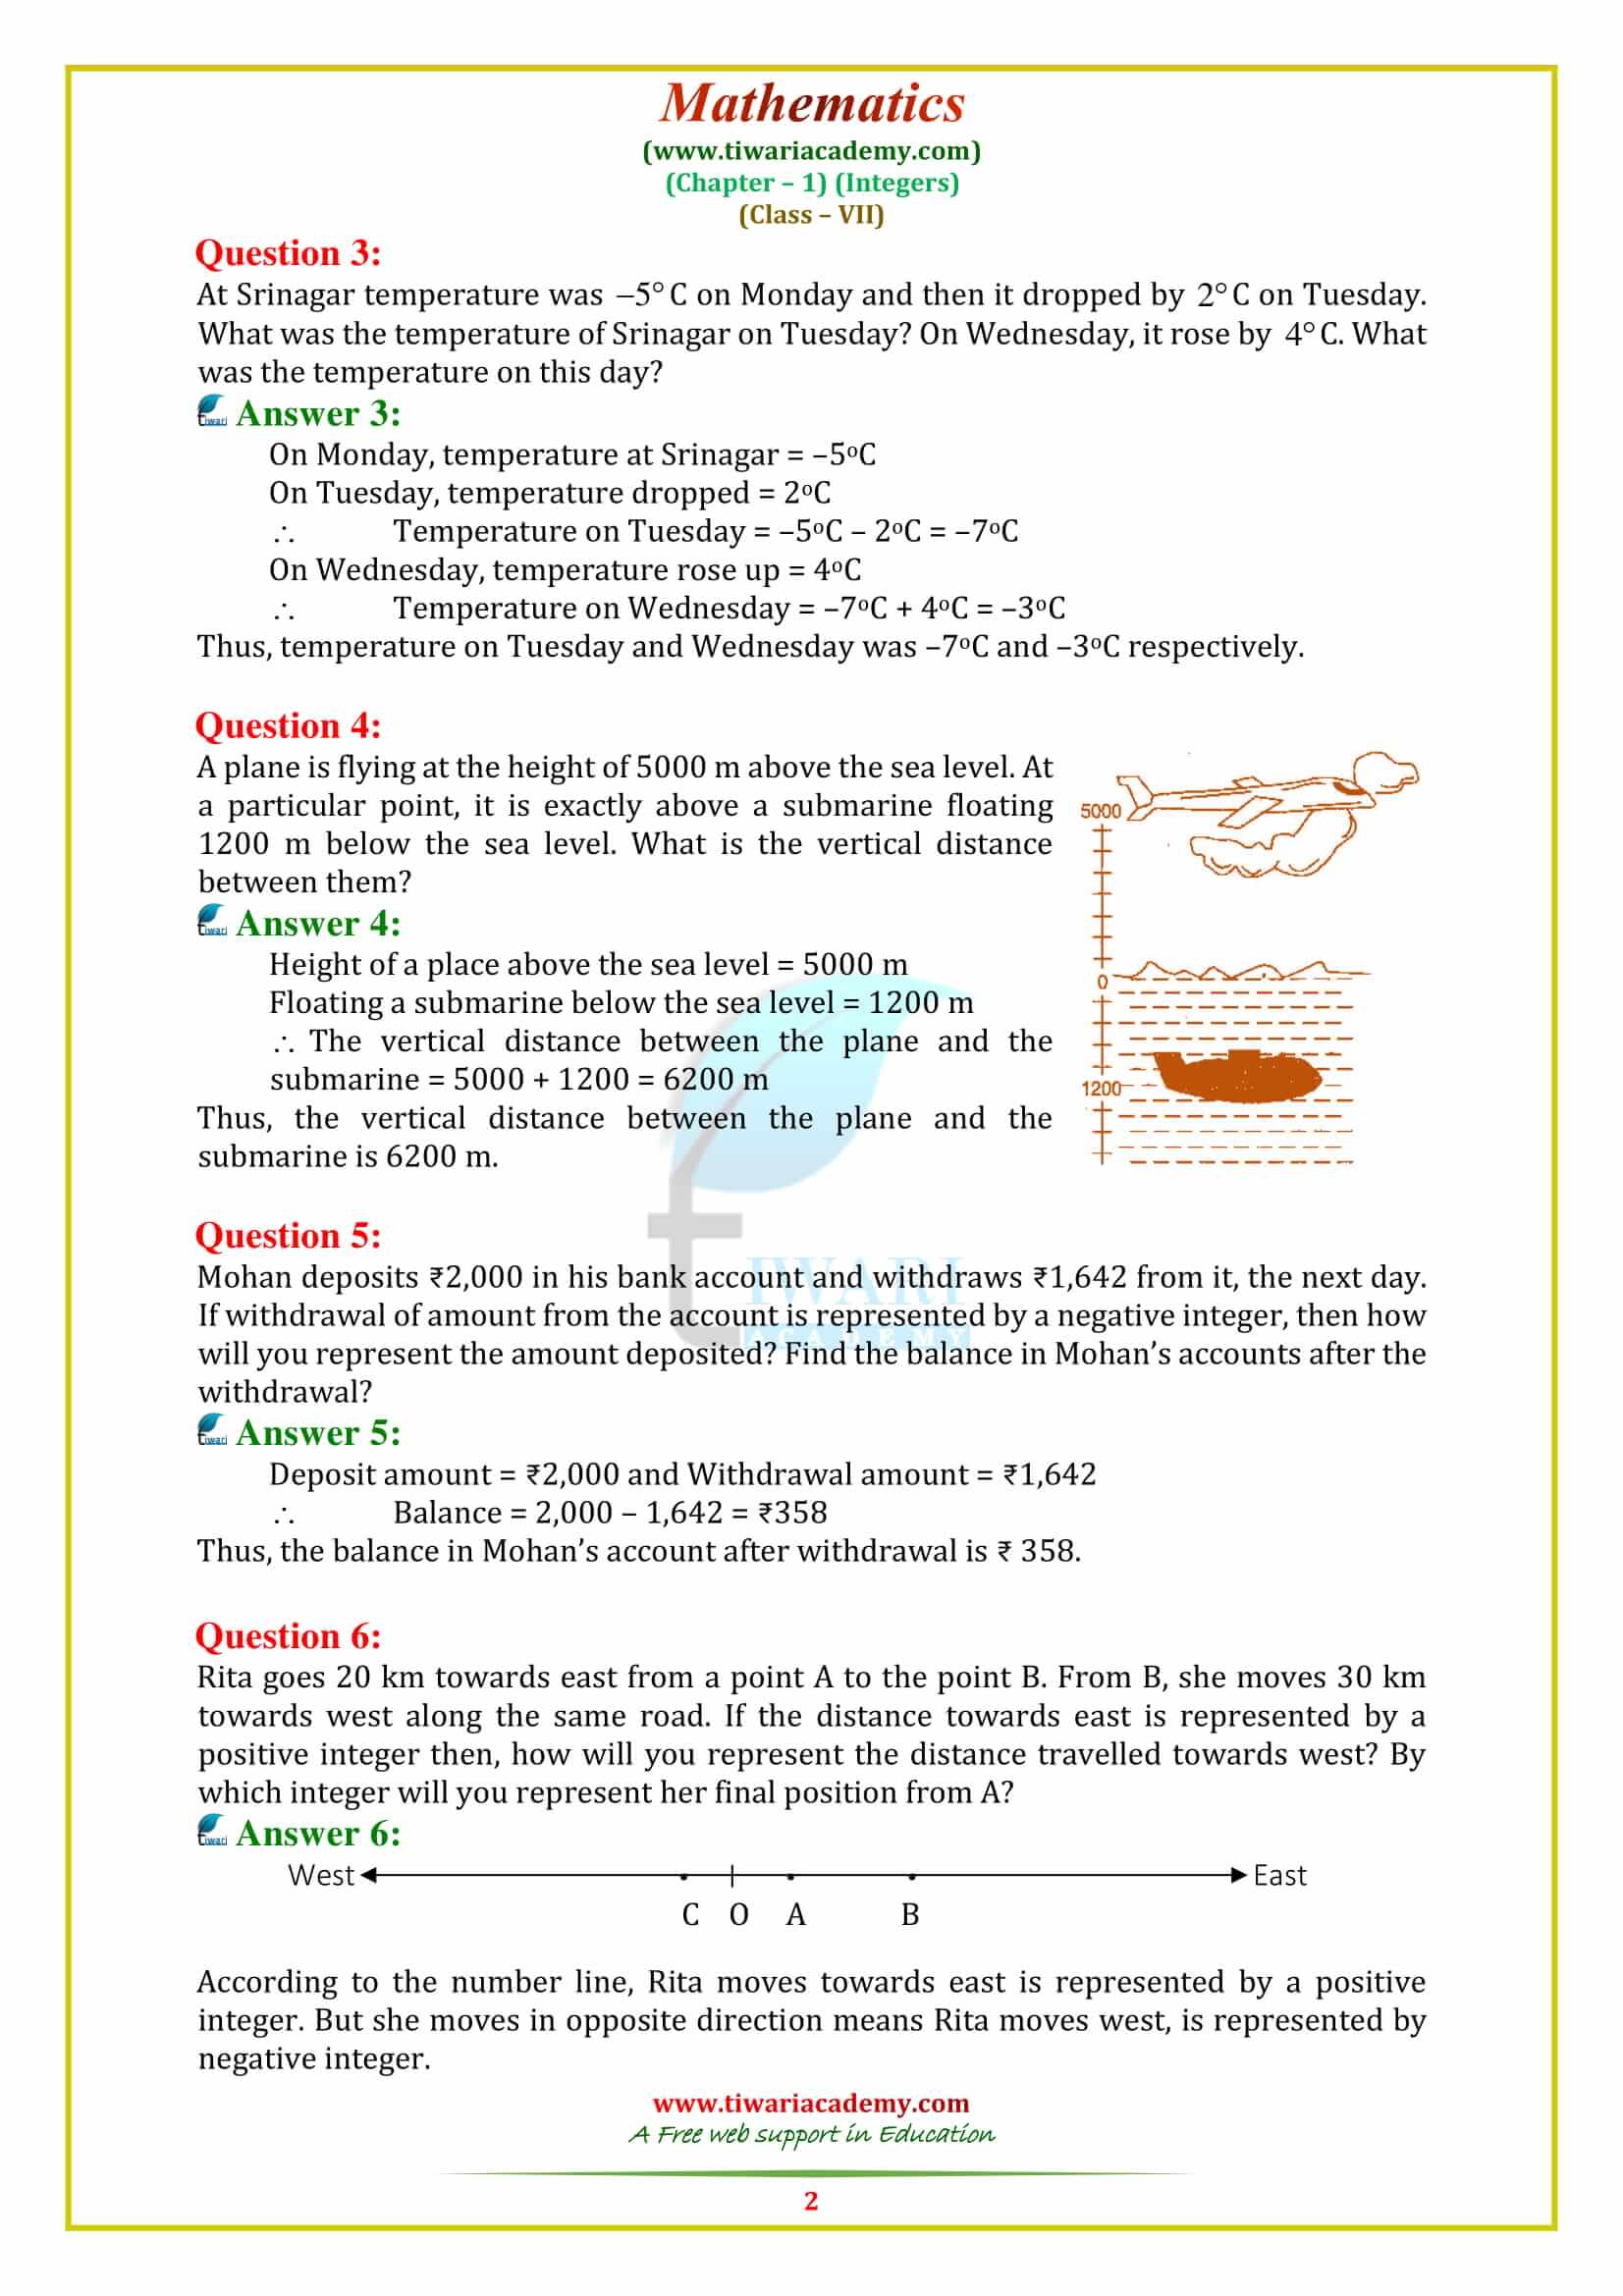 NCERT Solutions for Class 7 Maths Chapter 1 Integers all exercises